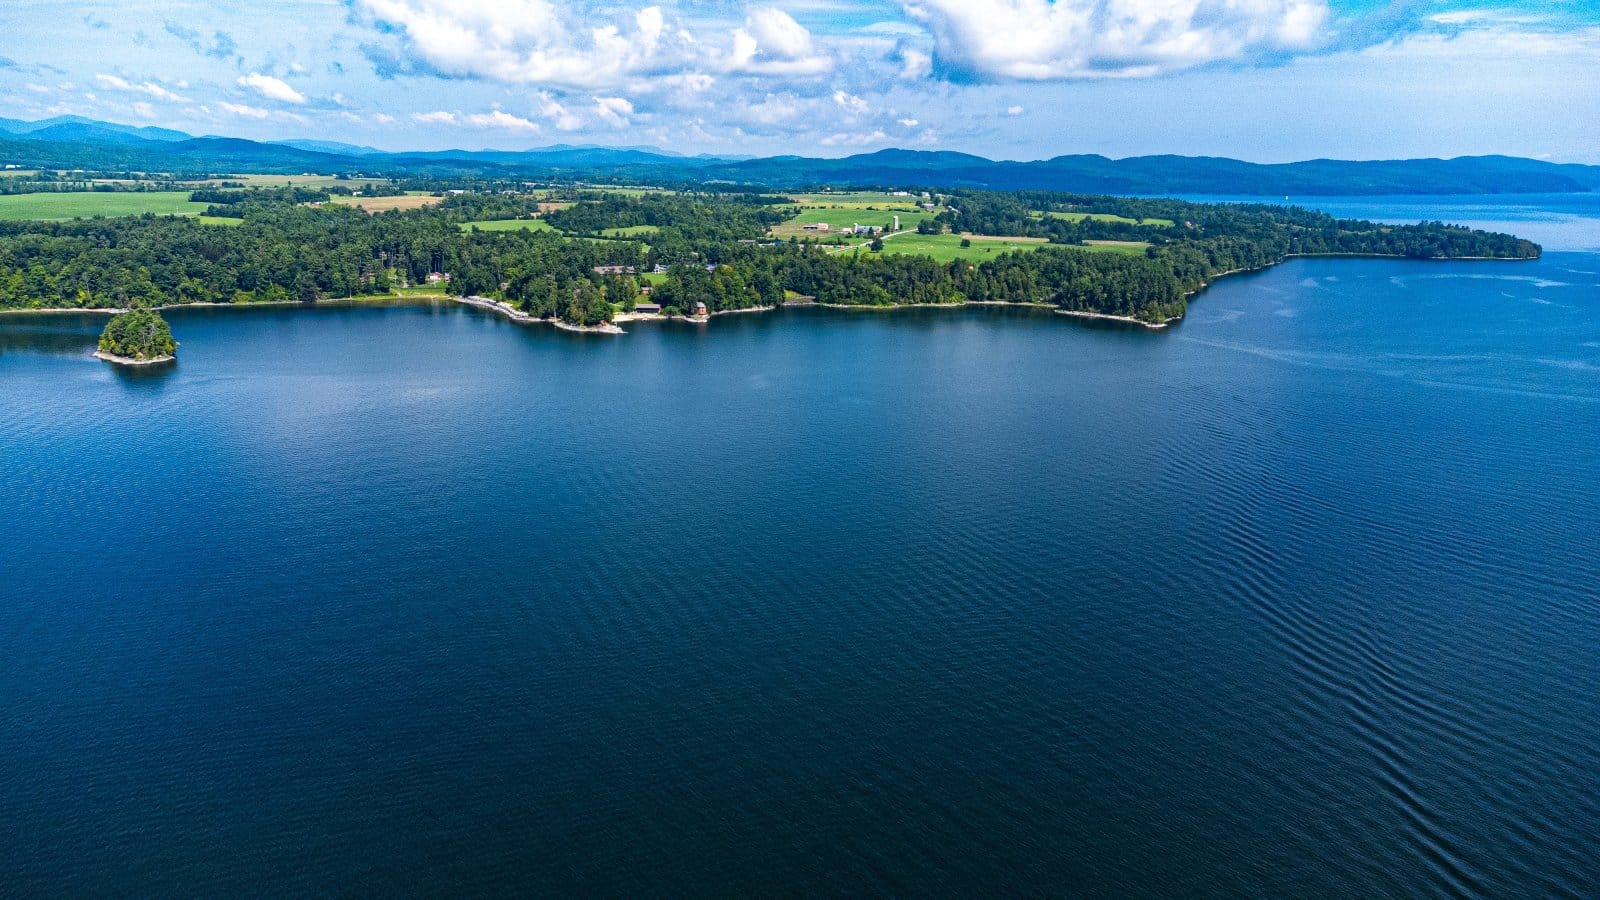 <p class="wp-caption-text">Image Credit: Shutterstock / Alexander Ryan Thompson</p>  <p><span><strong>Depth:</strong> 400 feet</span> <span>Rich in history and legend, Lake Champlain offers myriad recreational activities, from exploring historic sites and lighthouses to enjoying its diverse aquatic life.</span></p>